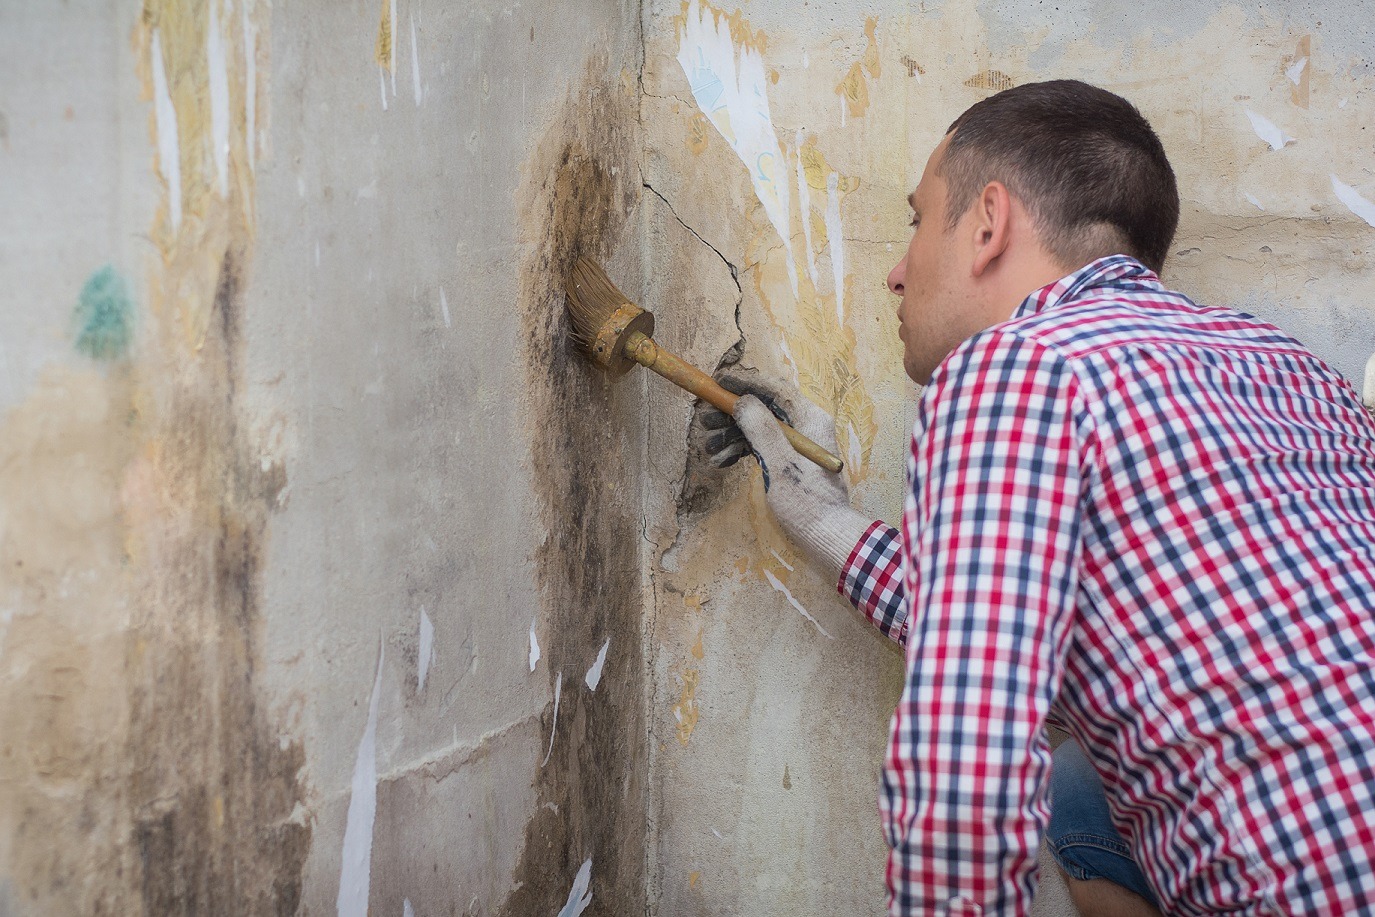 Mold removal 